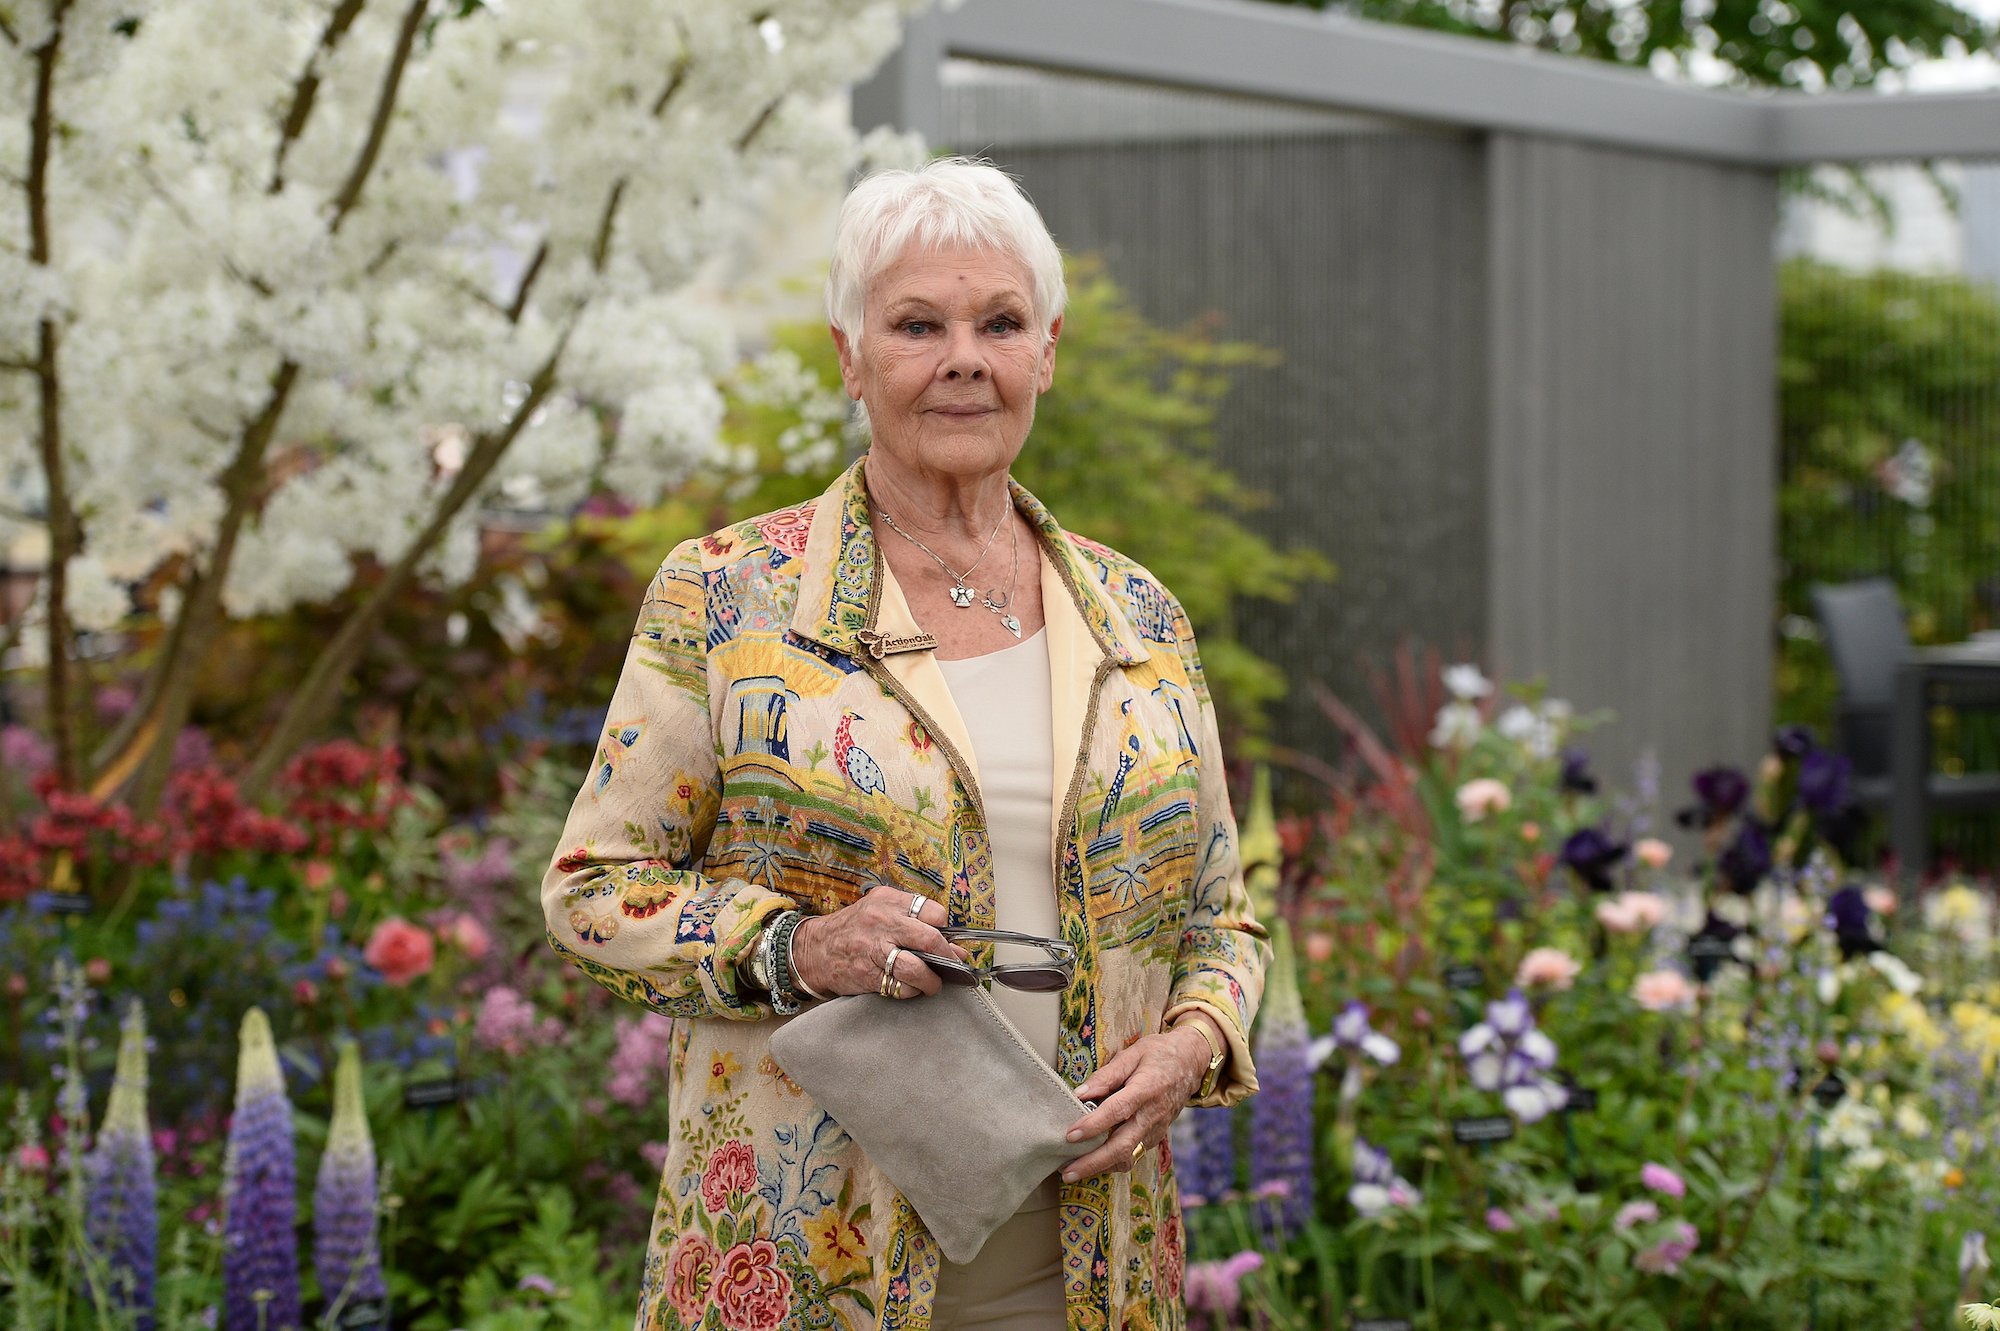 Judi Dench Won An Oscar In Only 8 Minutes Of Screen Time